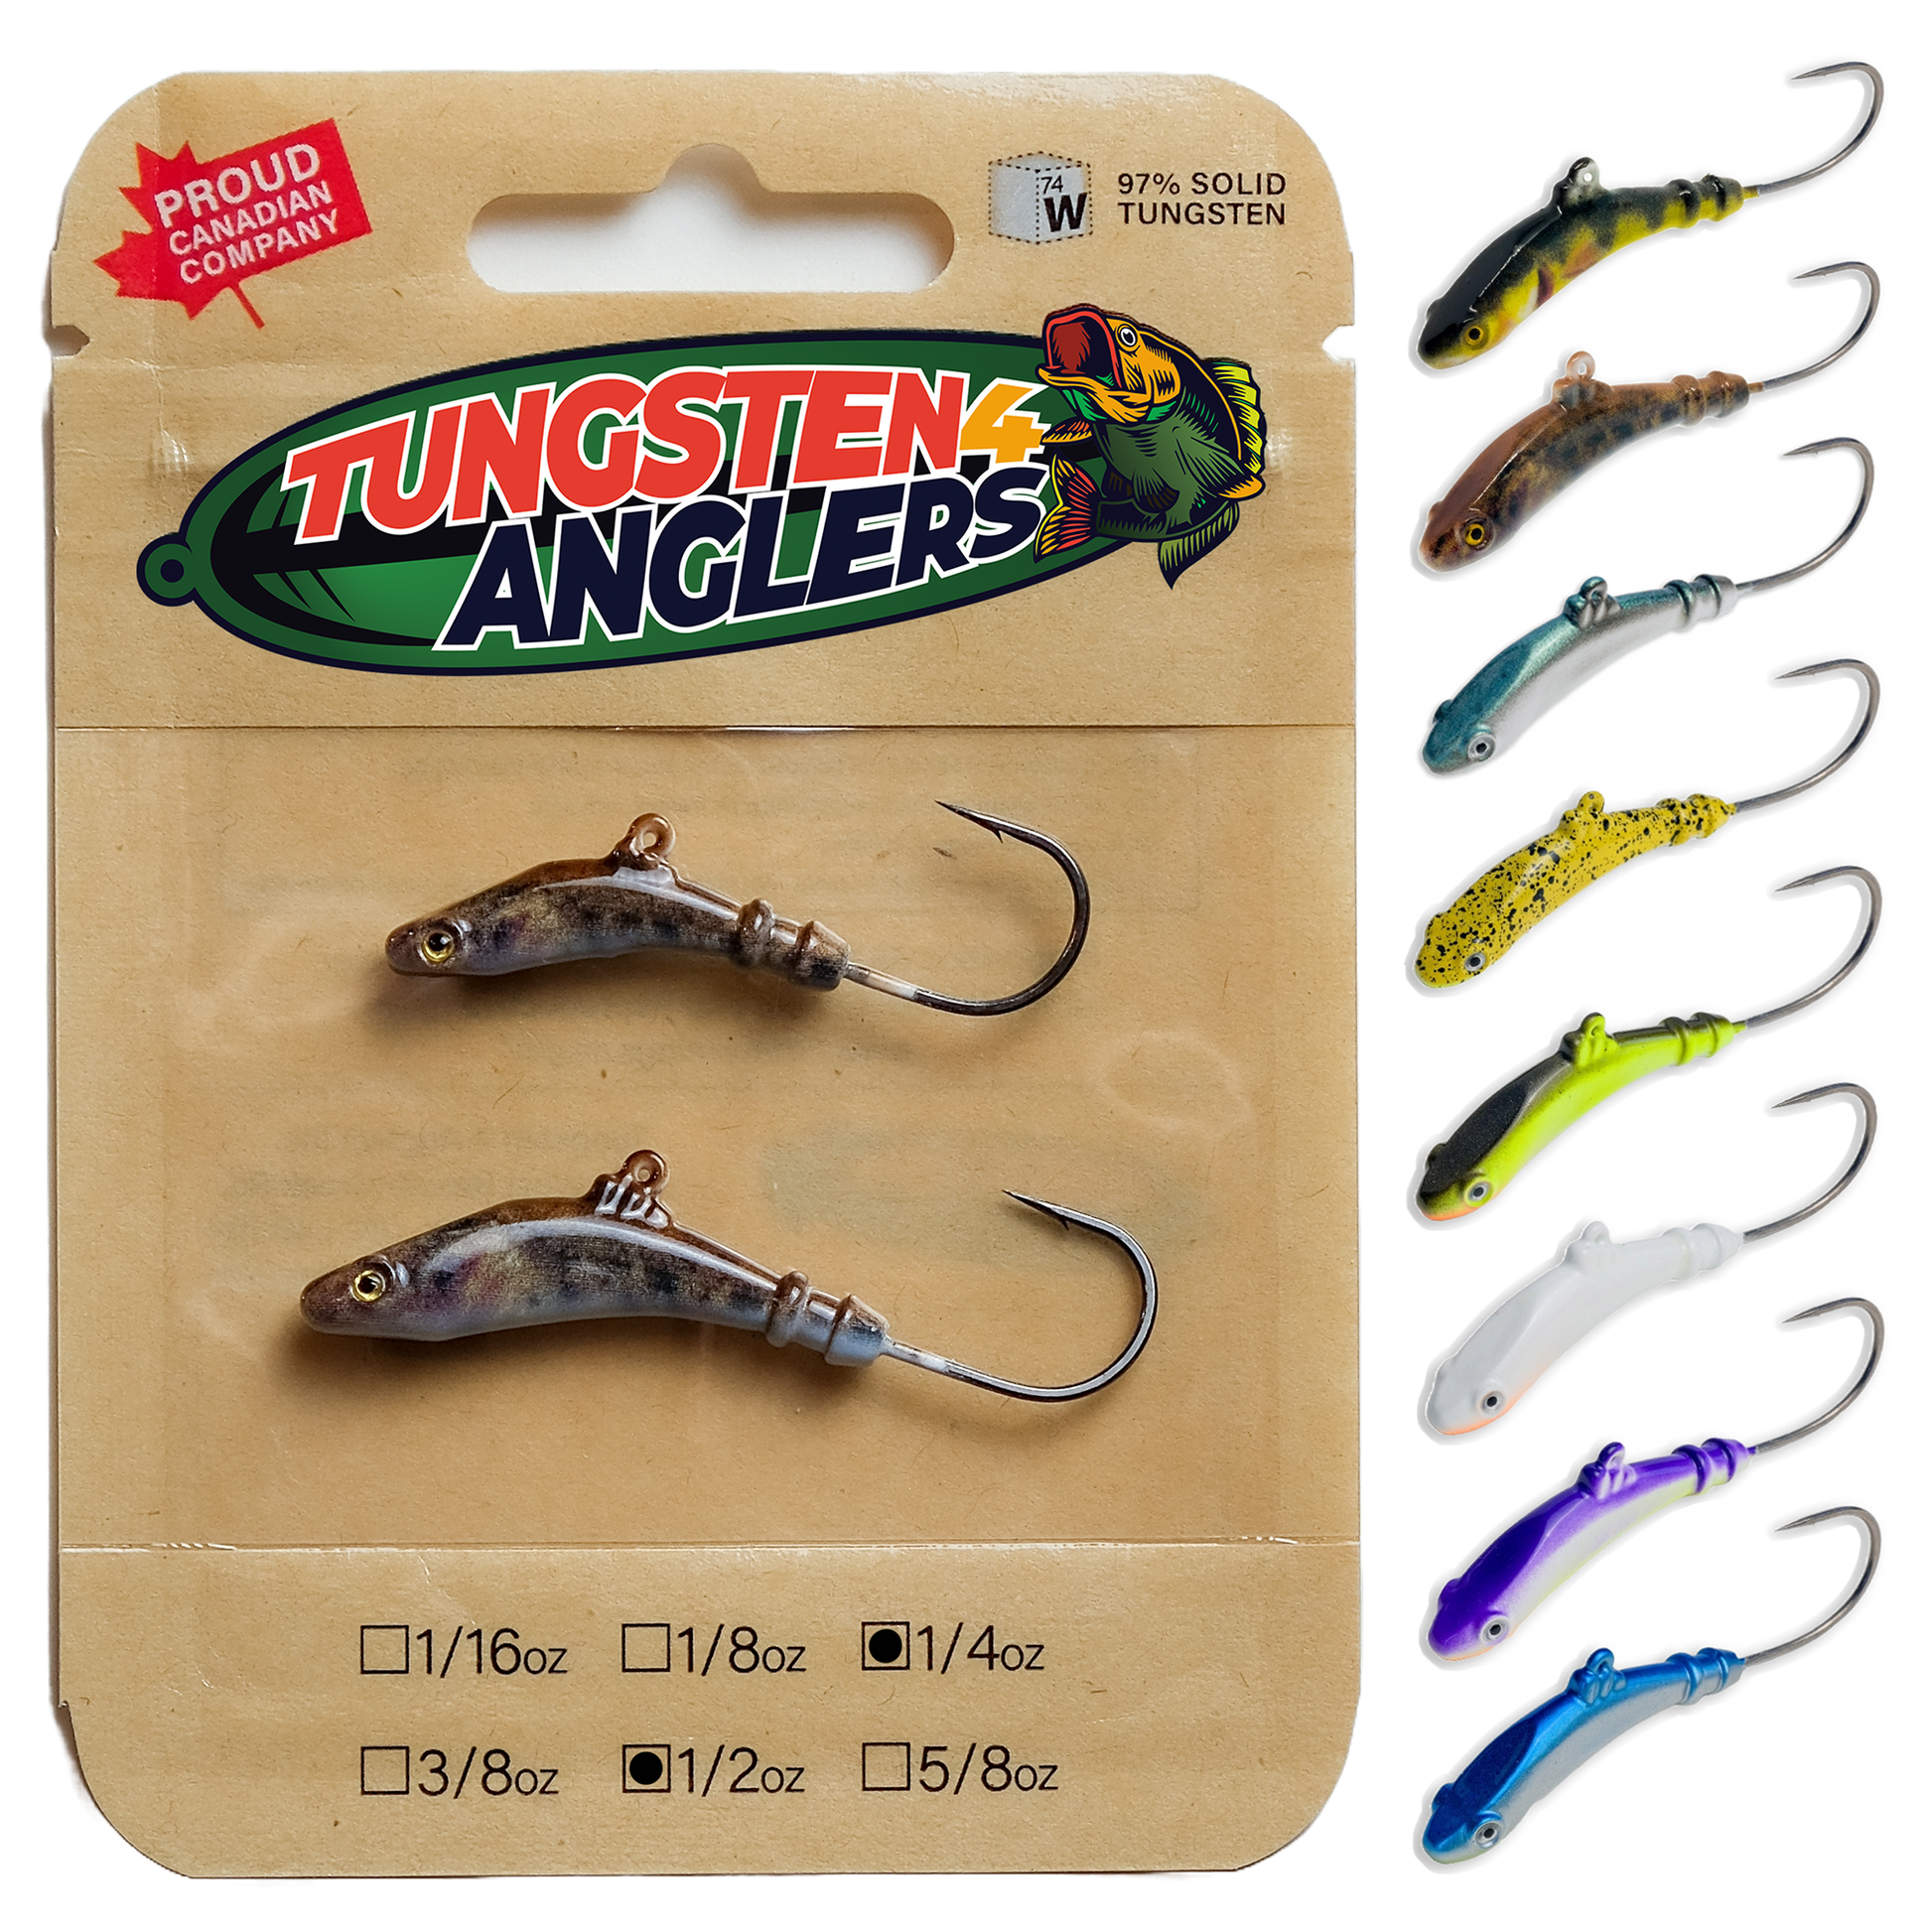 Cyber Jigs Packet, 2 pcs available in sizes 1/4oz and 1/2oz, and in many colors. Best for fishing and packaging